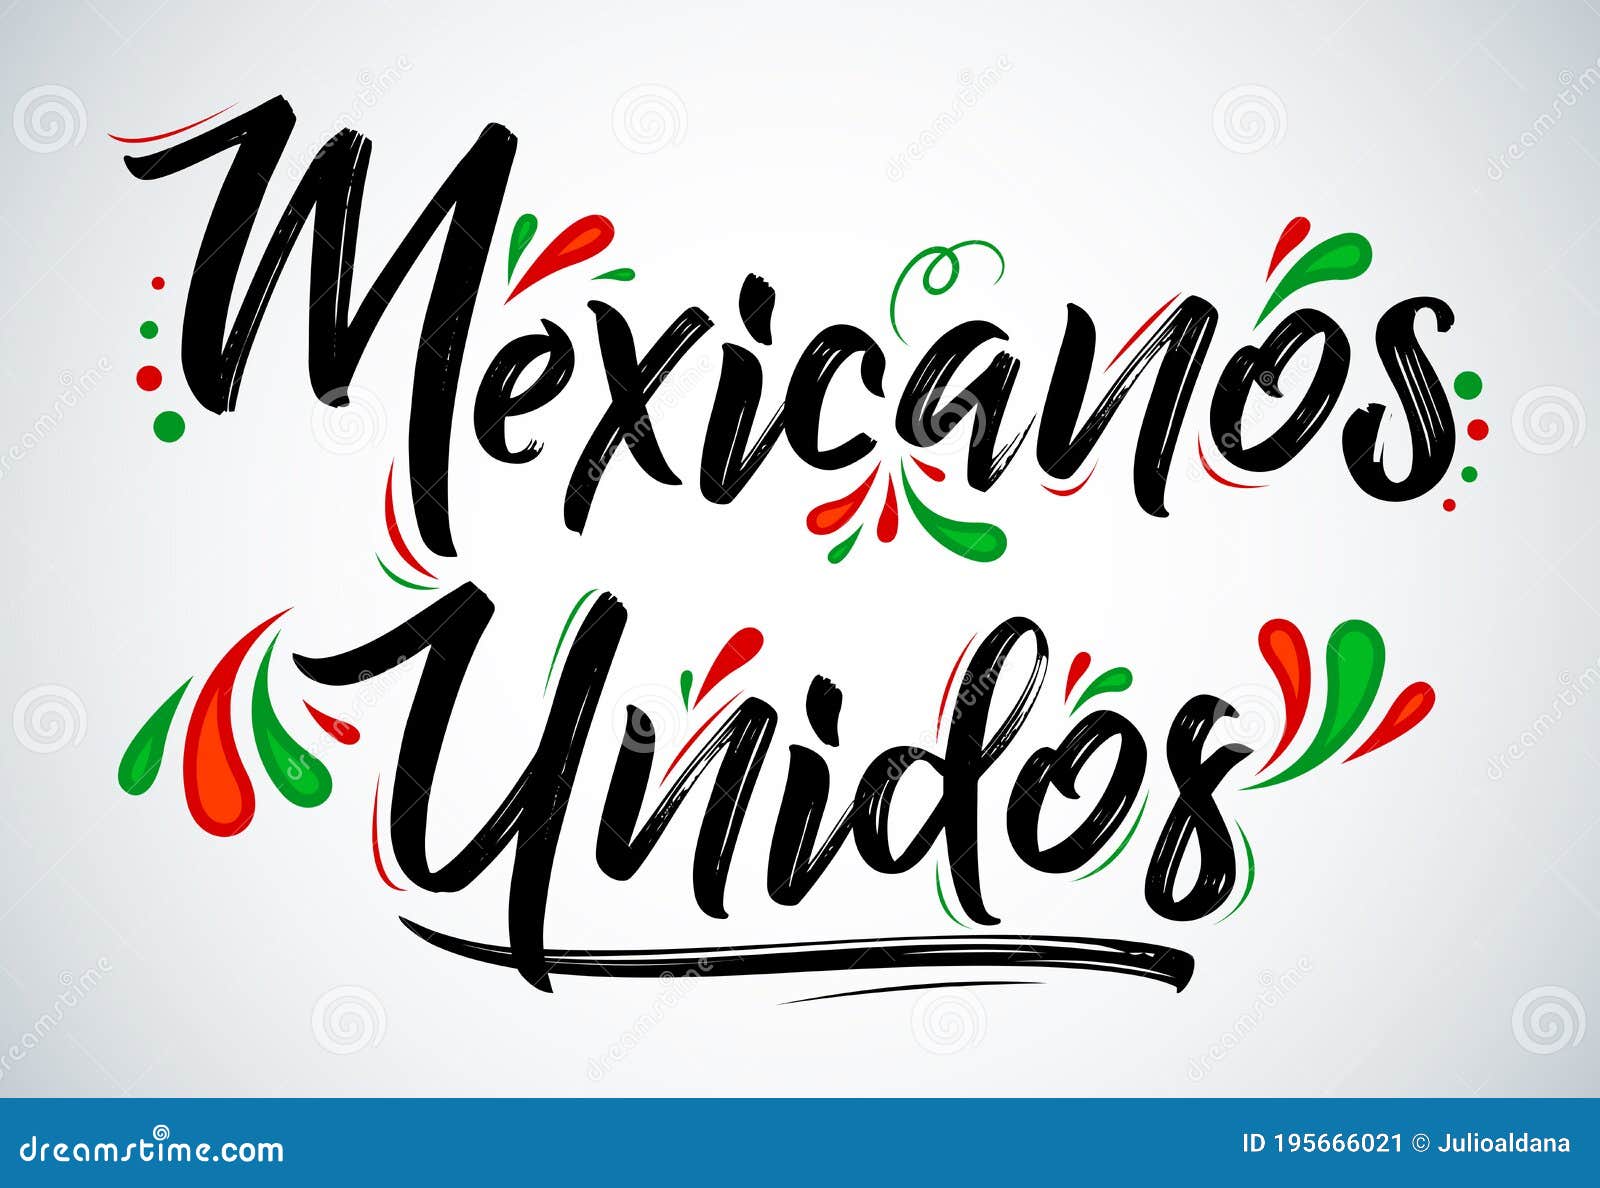 mexicanos unidos united mexicans spanish text,   together celebration.